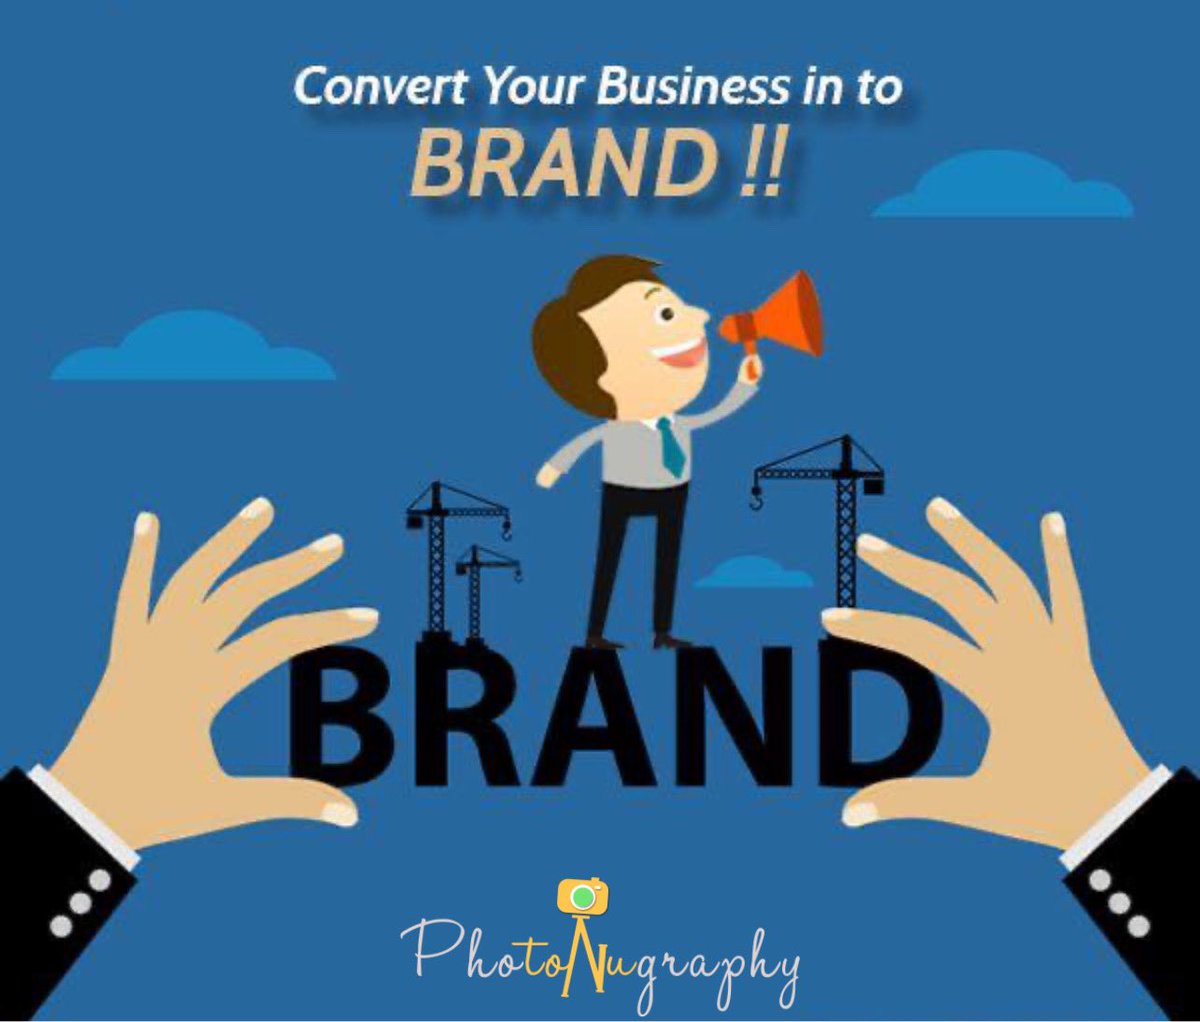 Covert your Business in to BRAND.
.
.

#digitalmarketing #marketing #socialmediamarketing #socialmedia #business #marketingdigital #branding #seo #instagram #advertising  #digital #marketingstrategy #marketingtips  #smallbusiness #design ##photography #graphicdesign #content